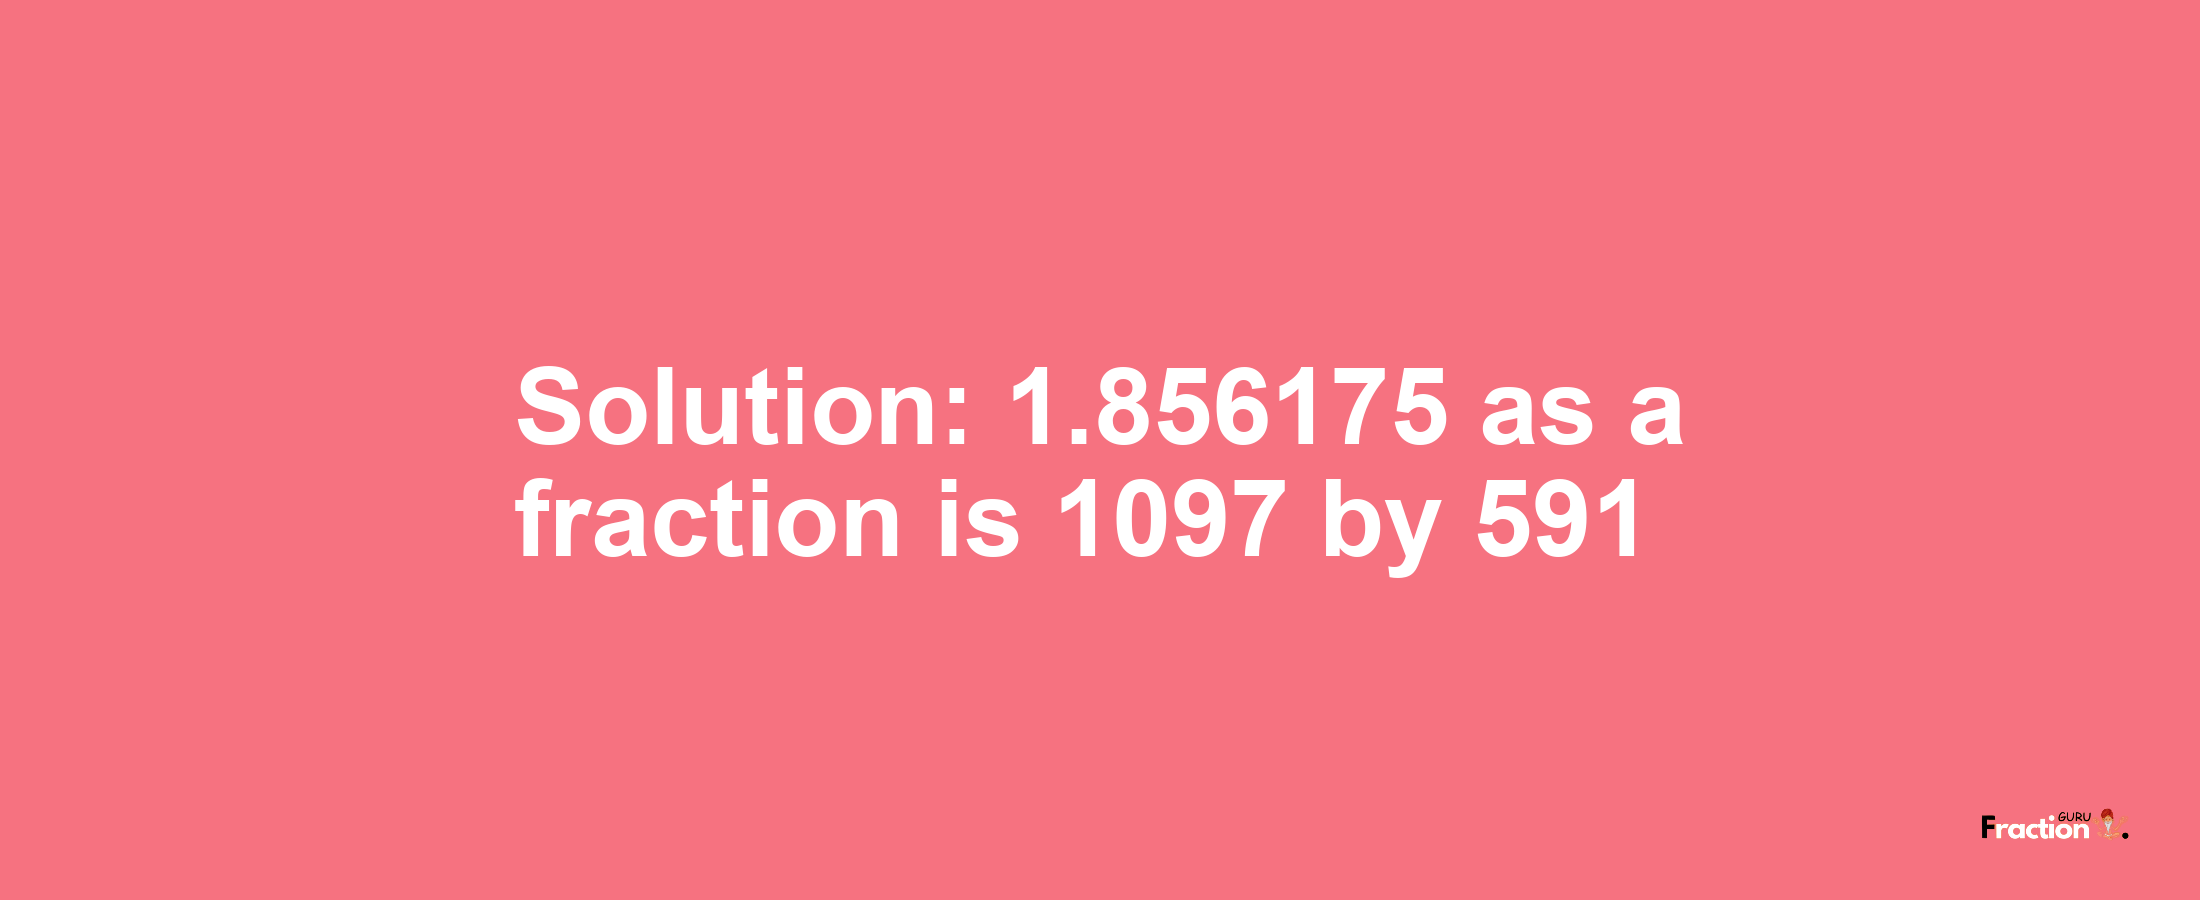 Solution:1.856175 as a fraction is 1097/591